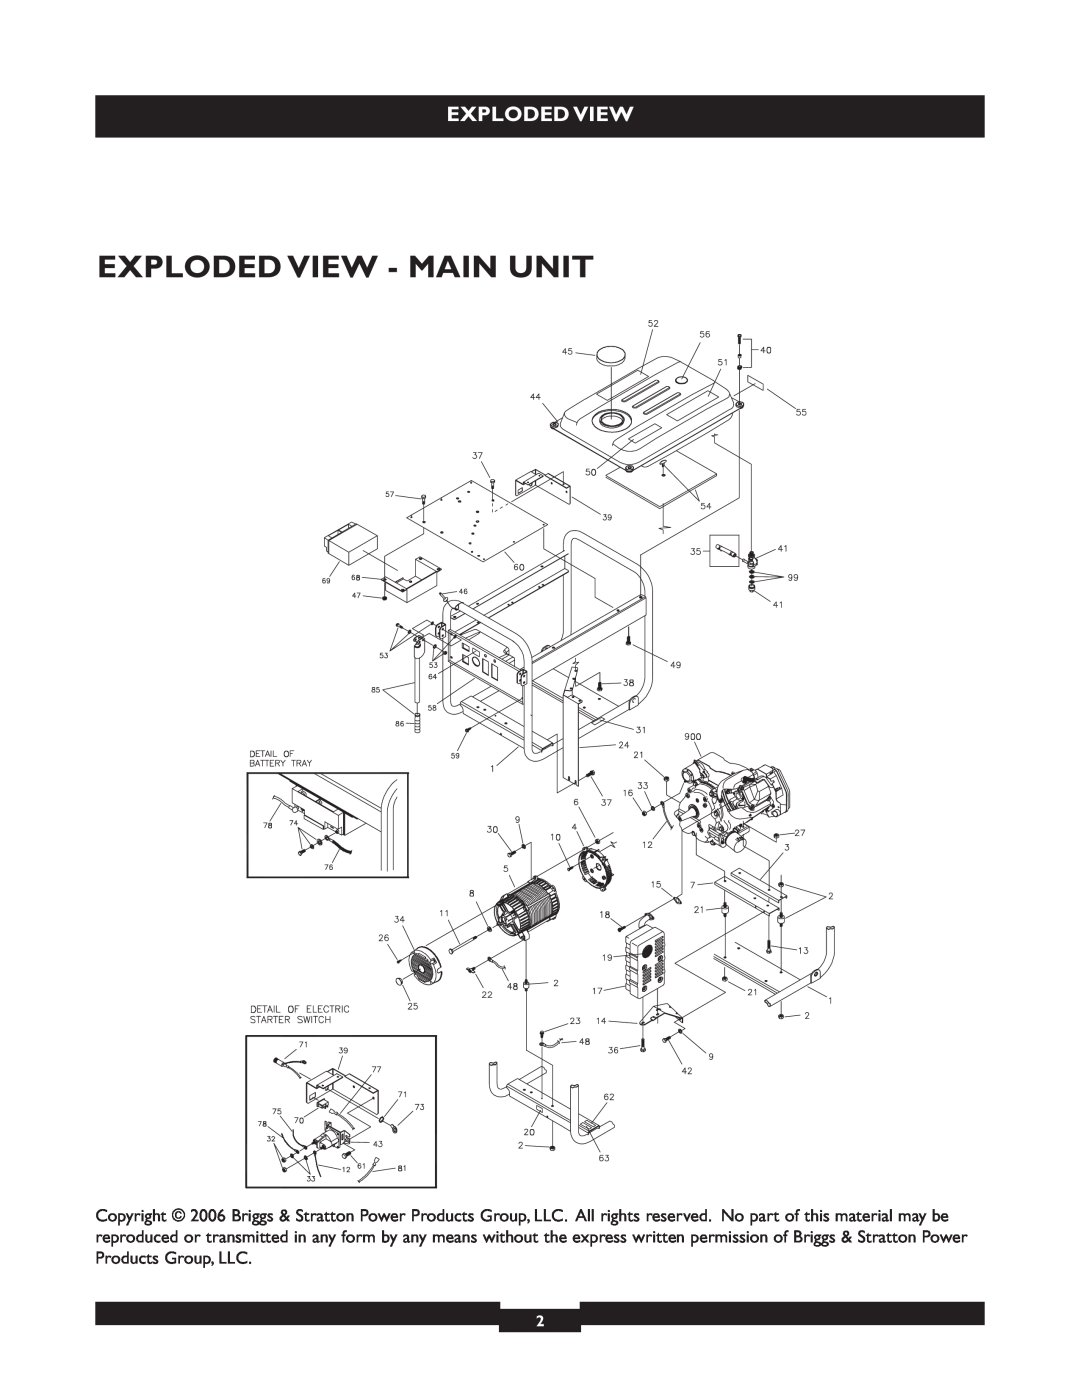 Briggs & Stratton 30254 manual Exploded View - Main Unit 